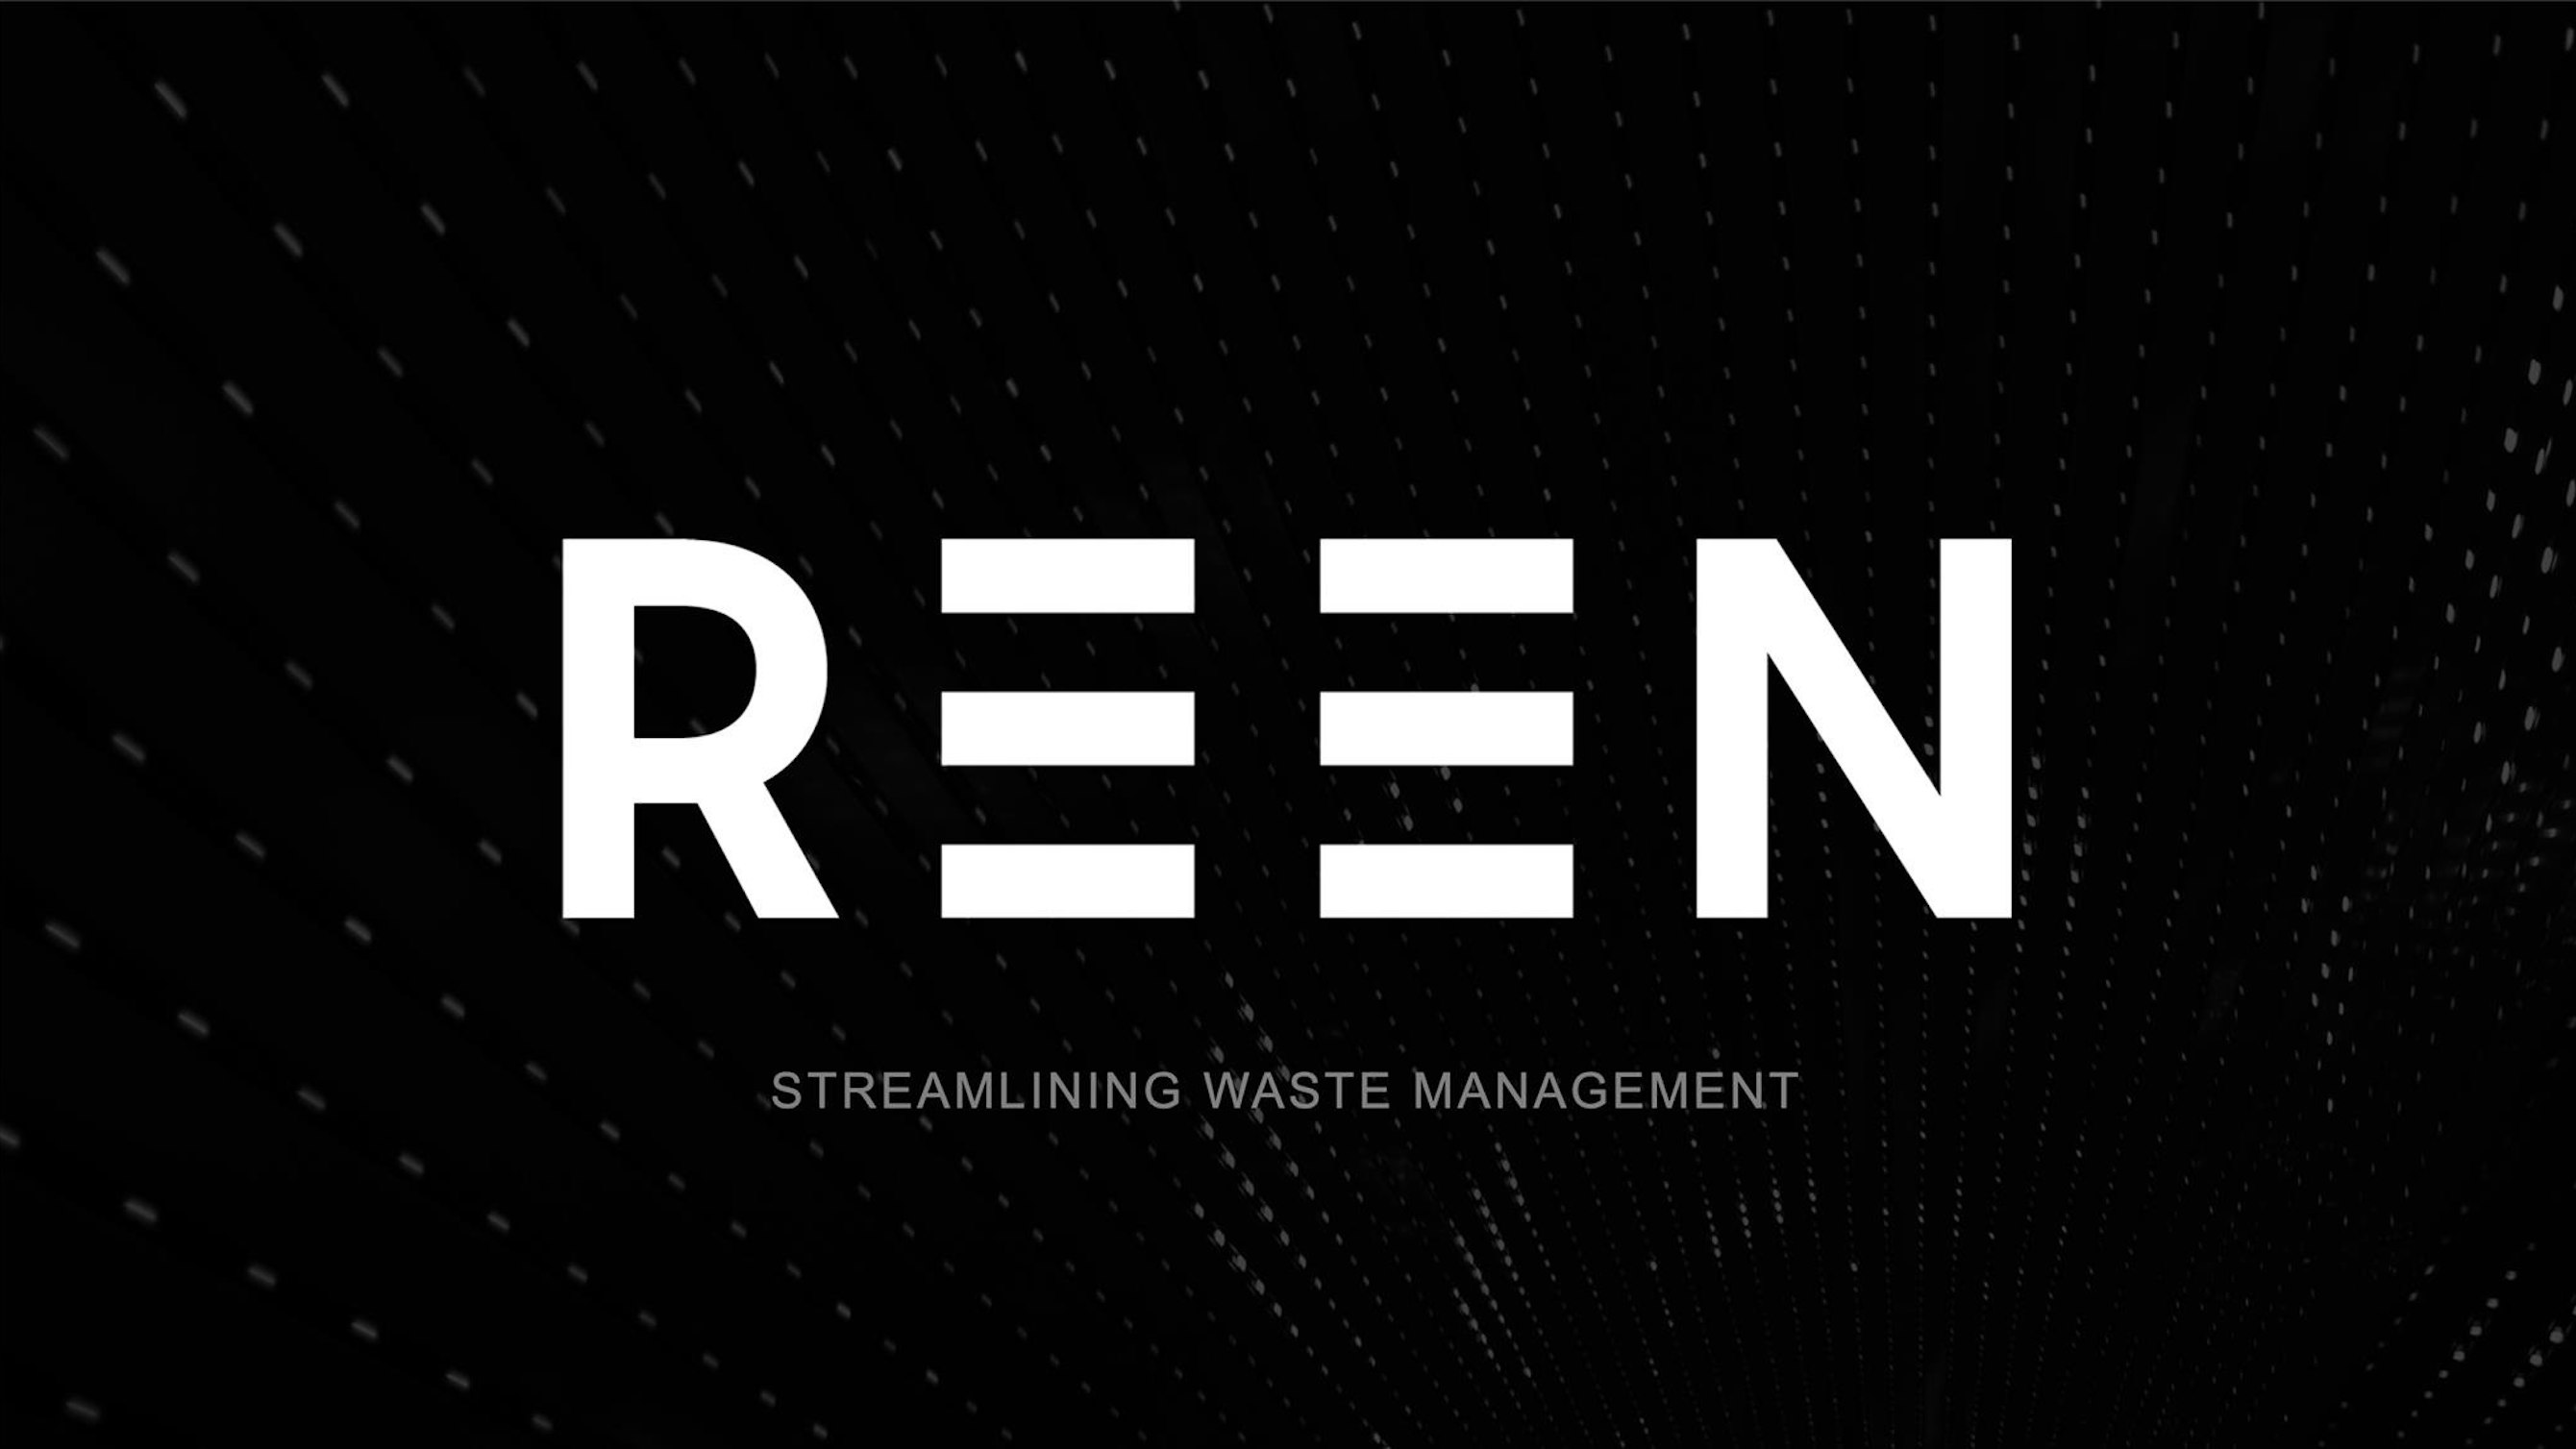 The ABAX Venture Company REEN acquires Enevo Group